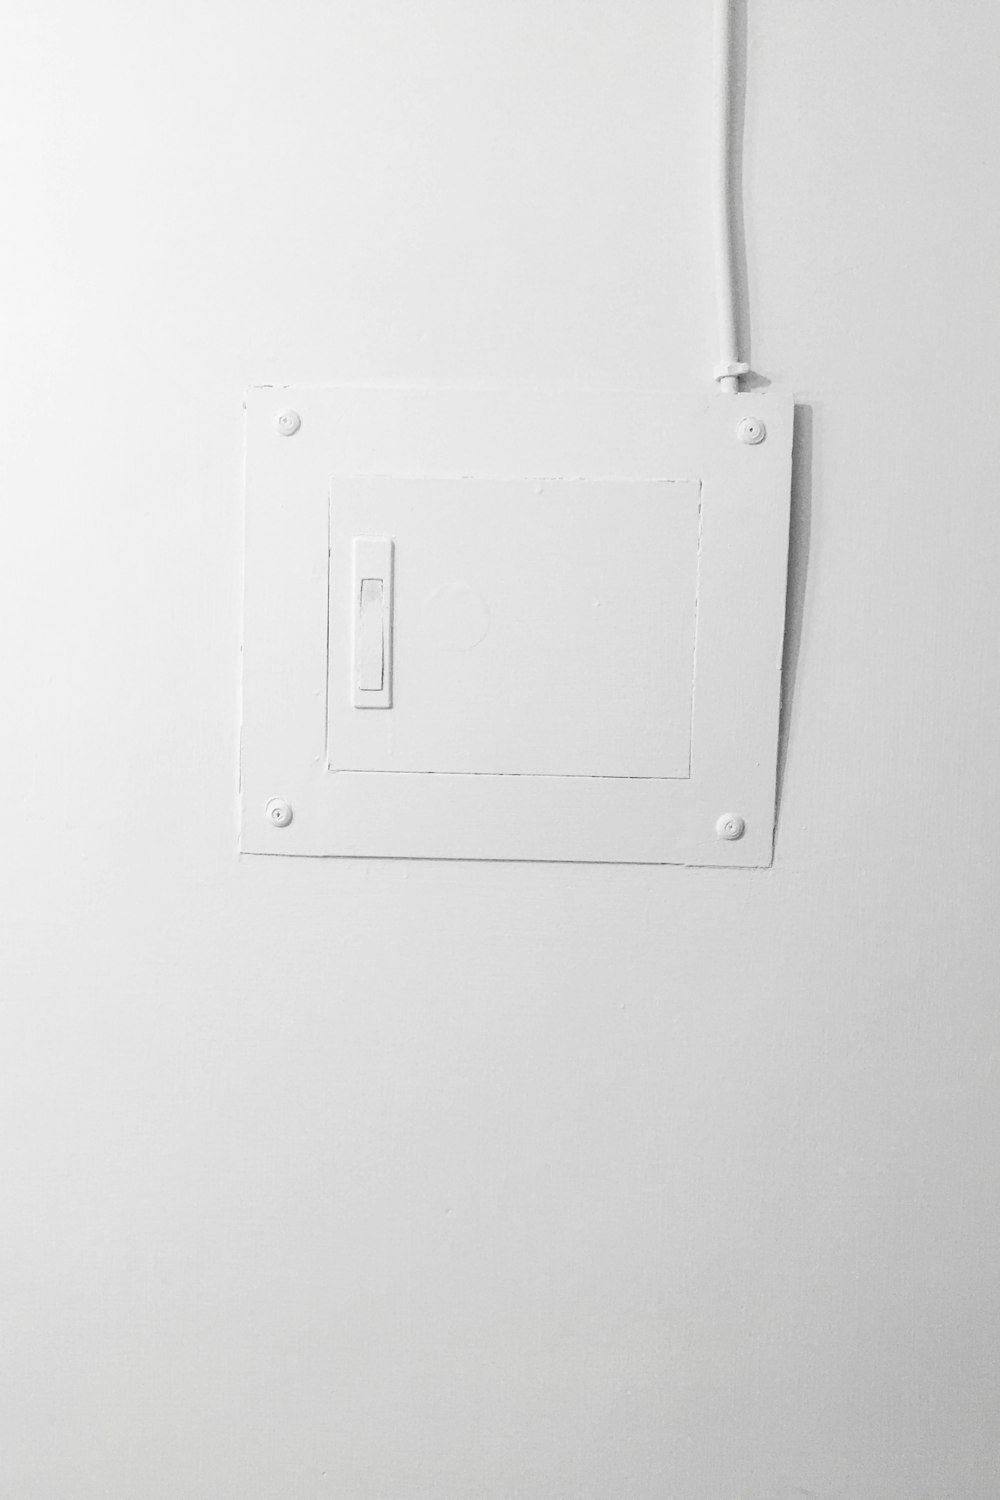 white electric switch mounted on white painted wall